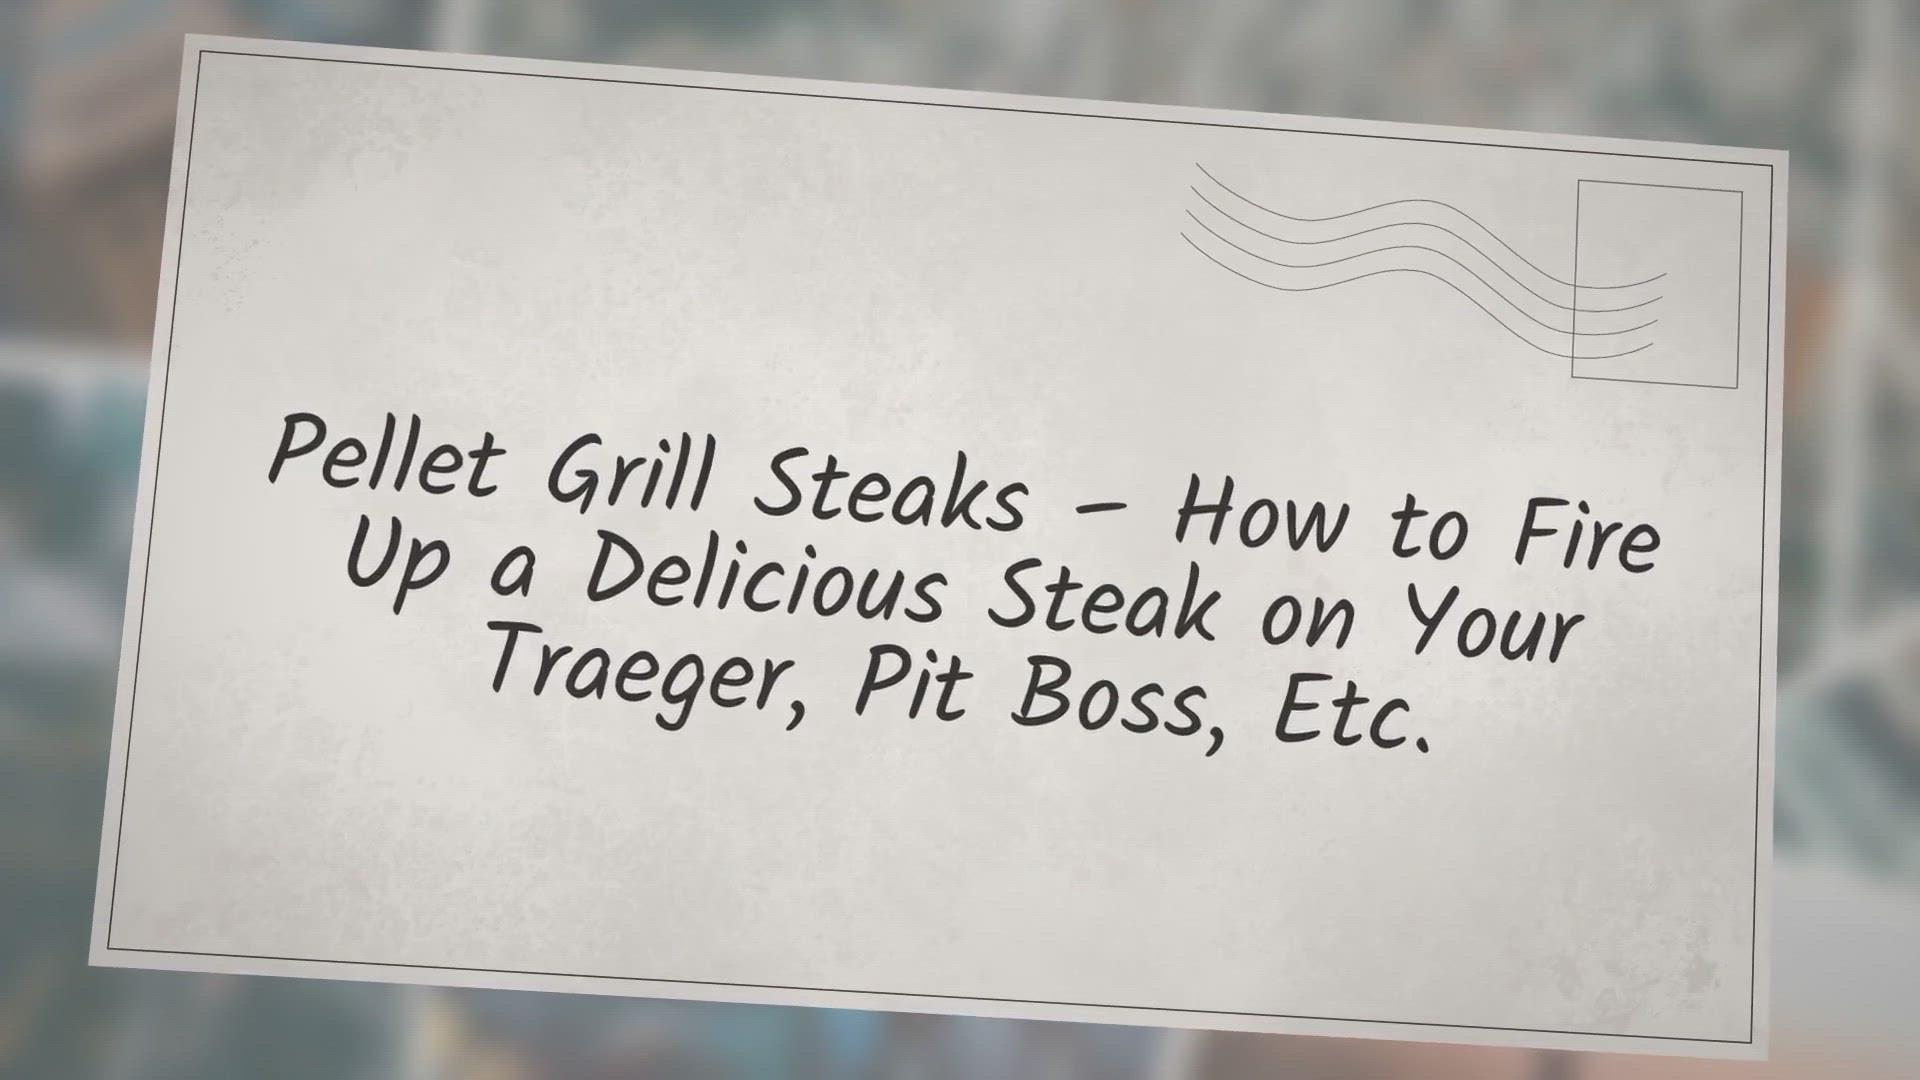 'Video thumbnail for Pellet Grill Steaks – How to Fire Up a Delicious Steak on Your Traeger, Pit Boss, Etc.'